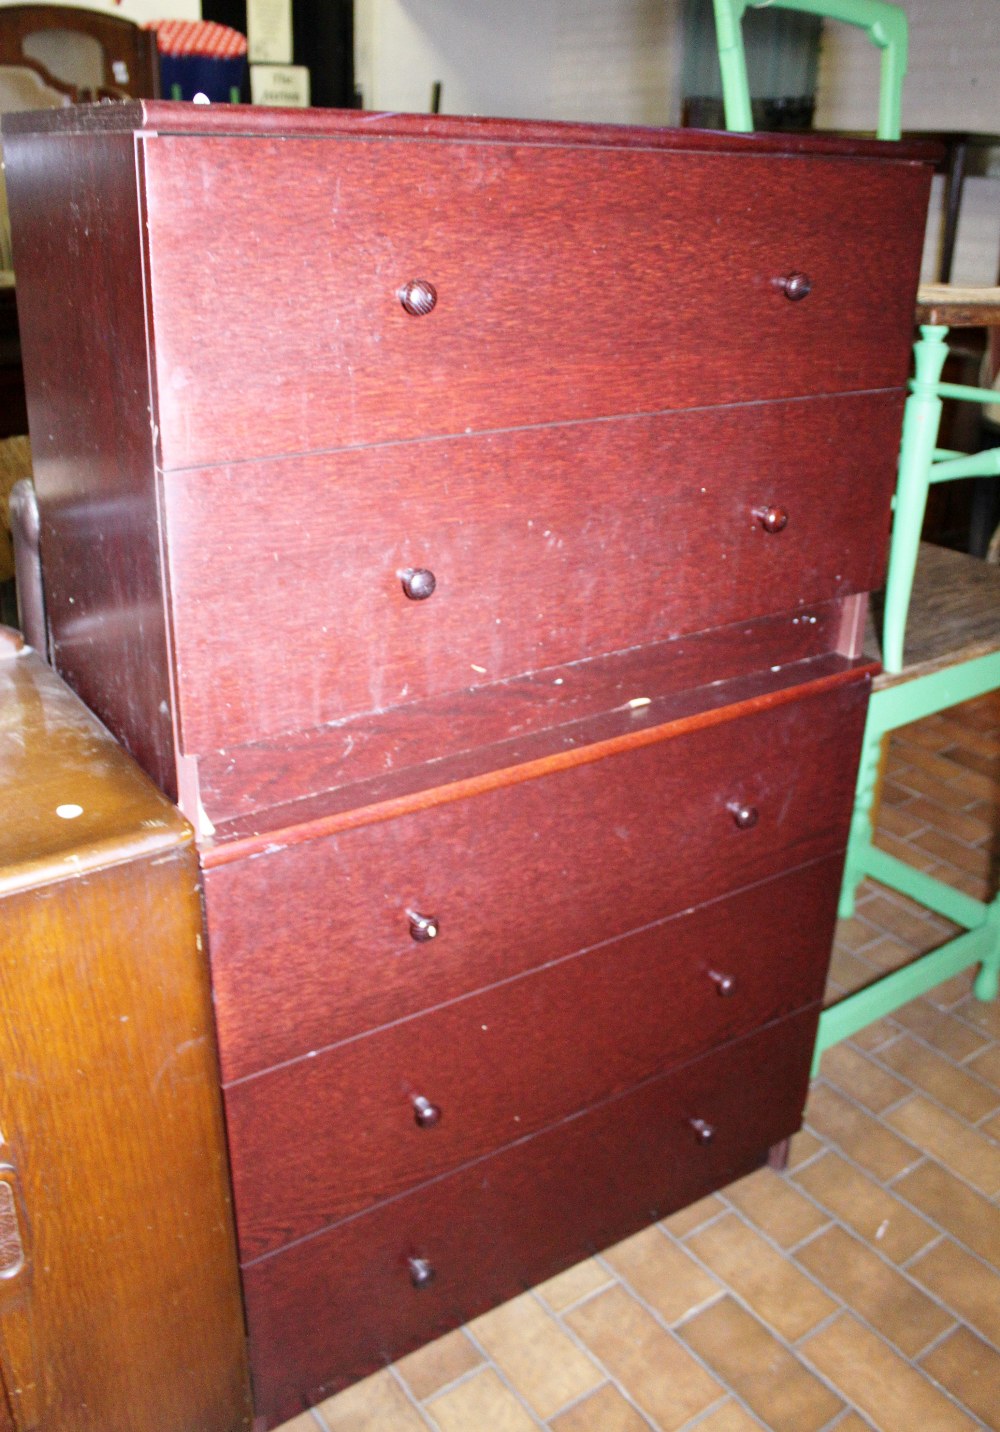 Two sets of drawers